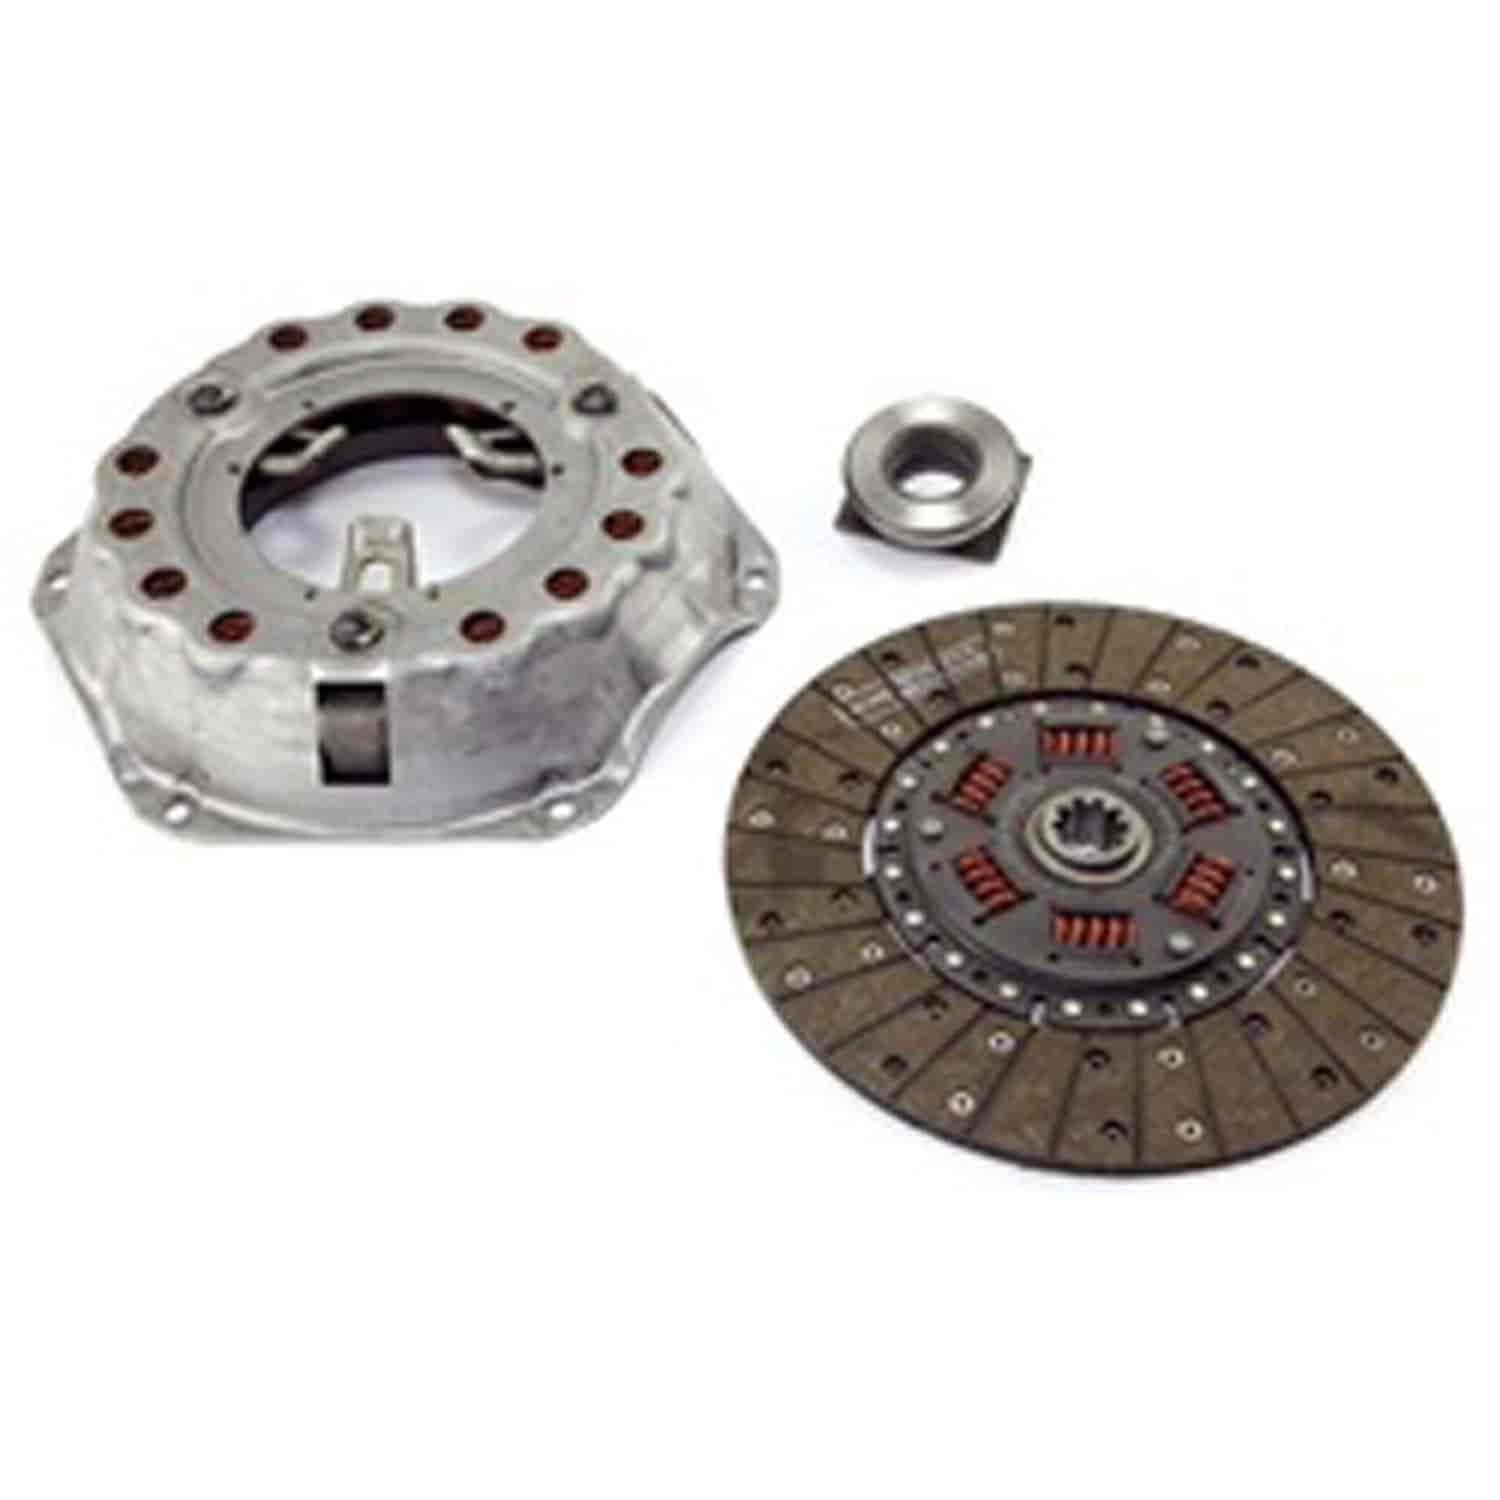 10.5 inch replacement clutch kit for 76-79 Jeep CJ-5/CJ-7s 6-cylinder or 8-cylinder engine. Includes